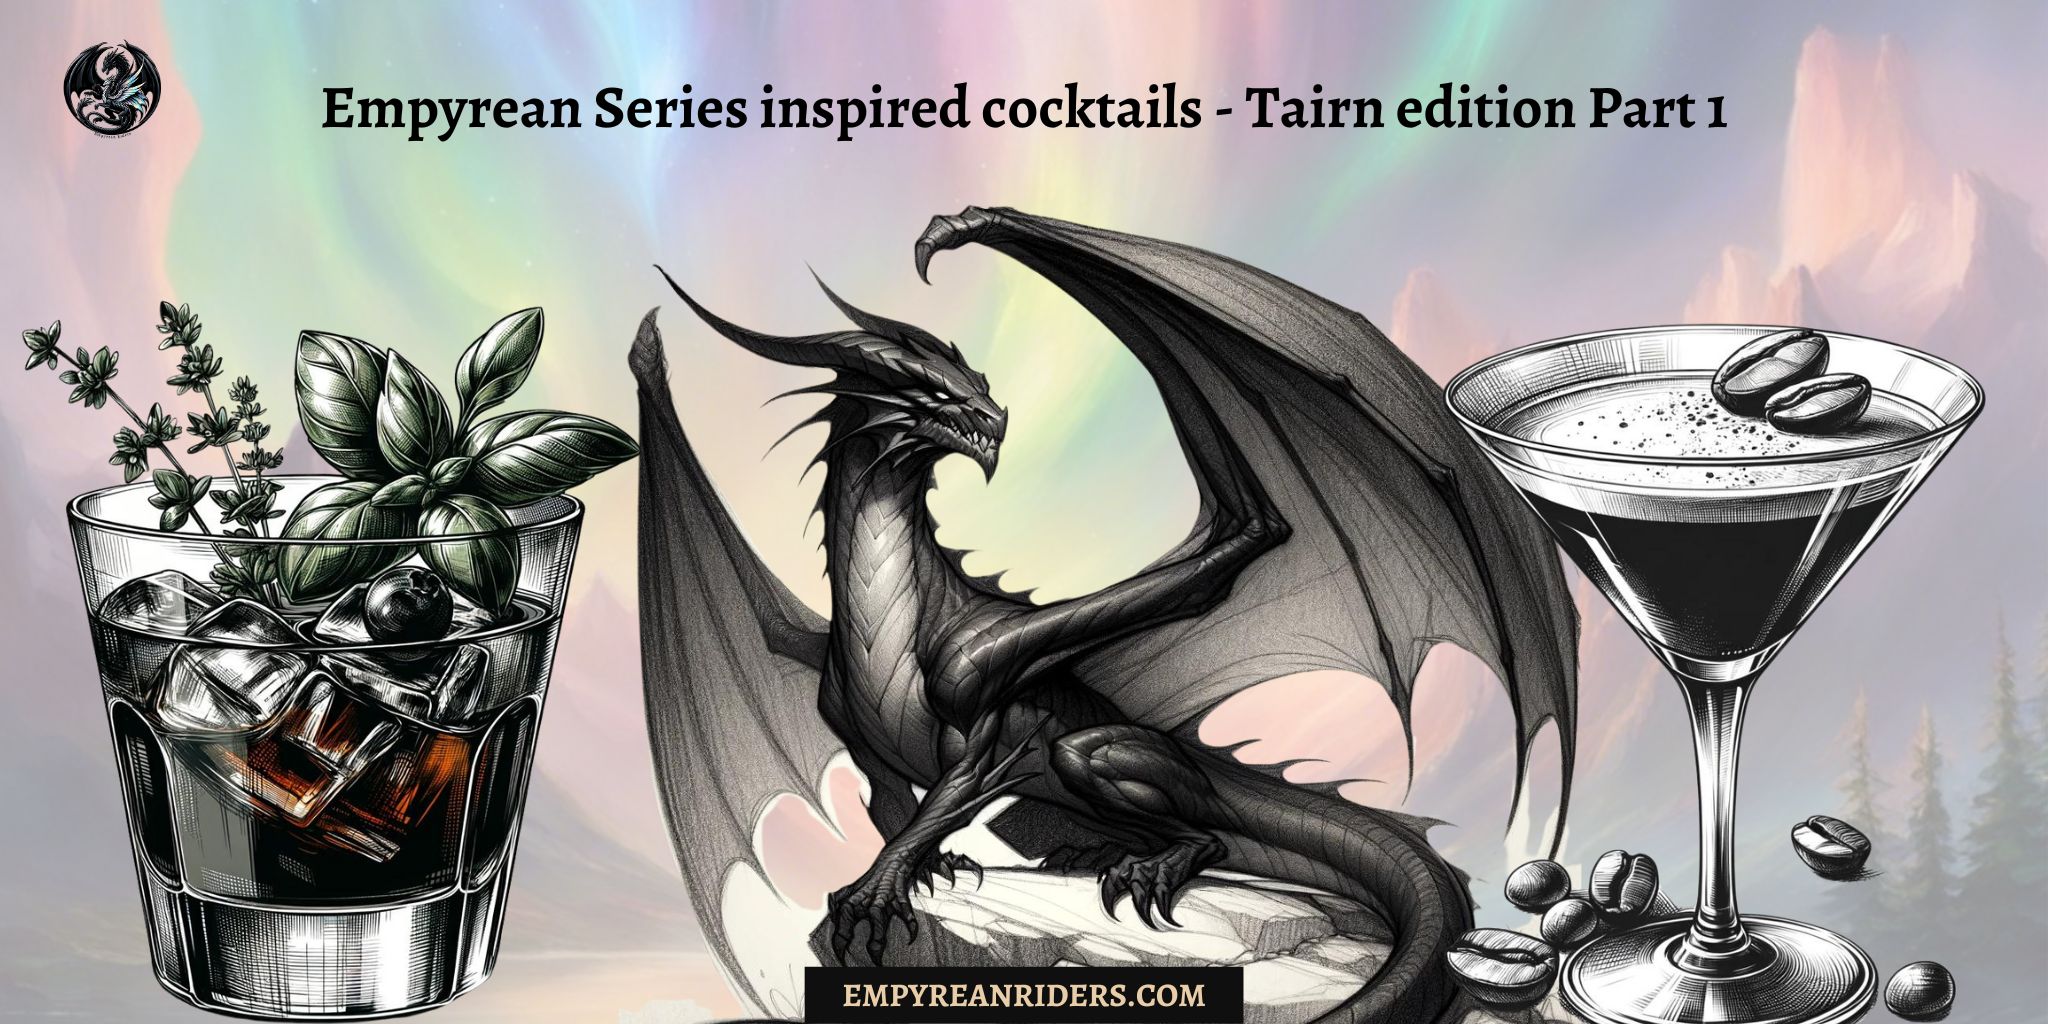 Empyrean Series inspired cocktails – Tairn edition Part 1